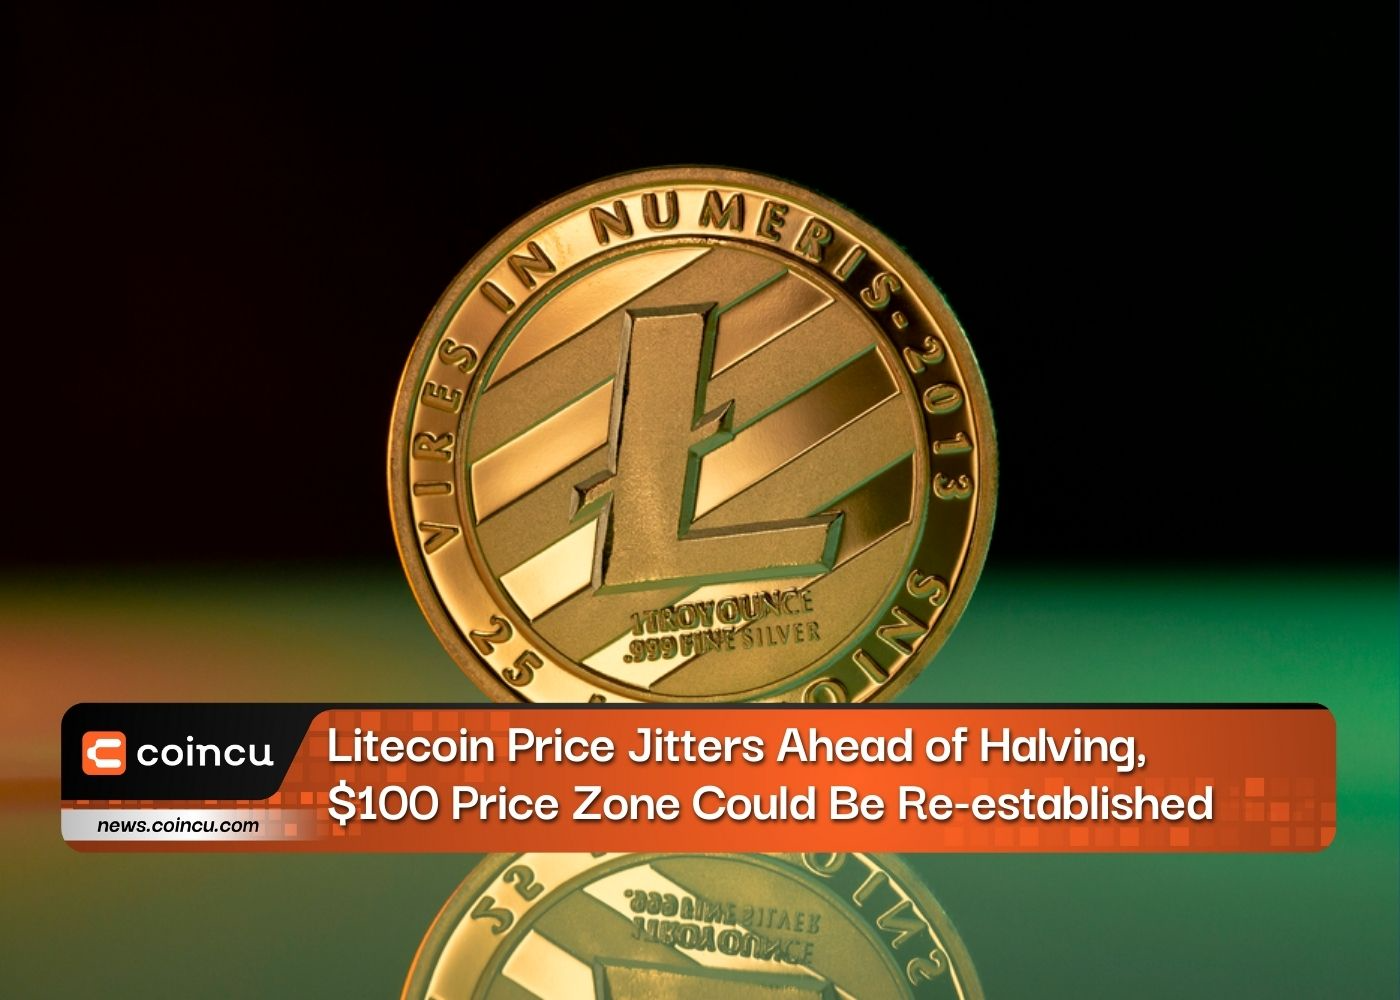 Litecoin Price Jitters Ahead Of Halving, $100 Price Zone Could Be Re-established